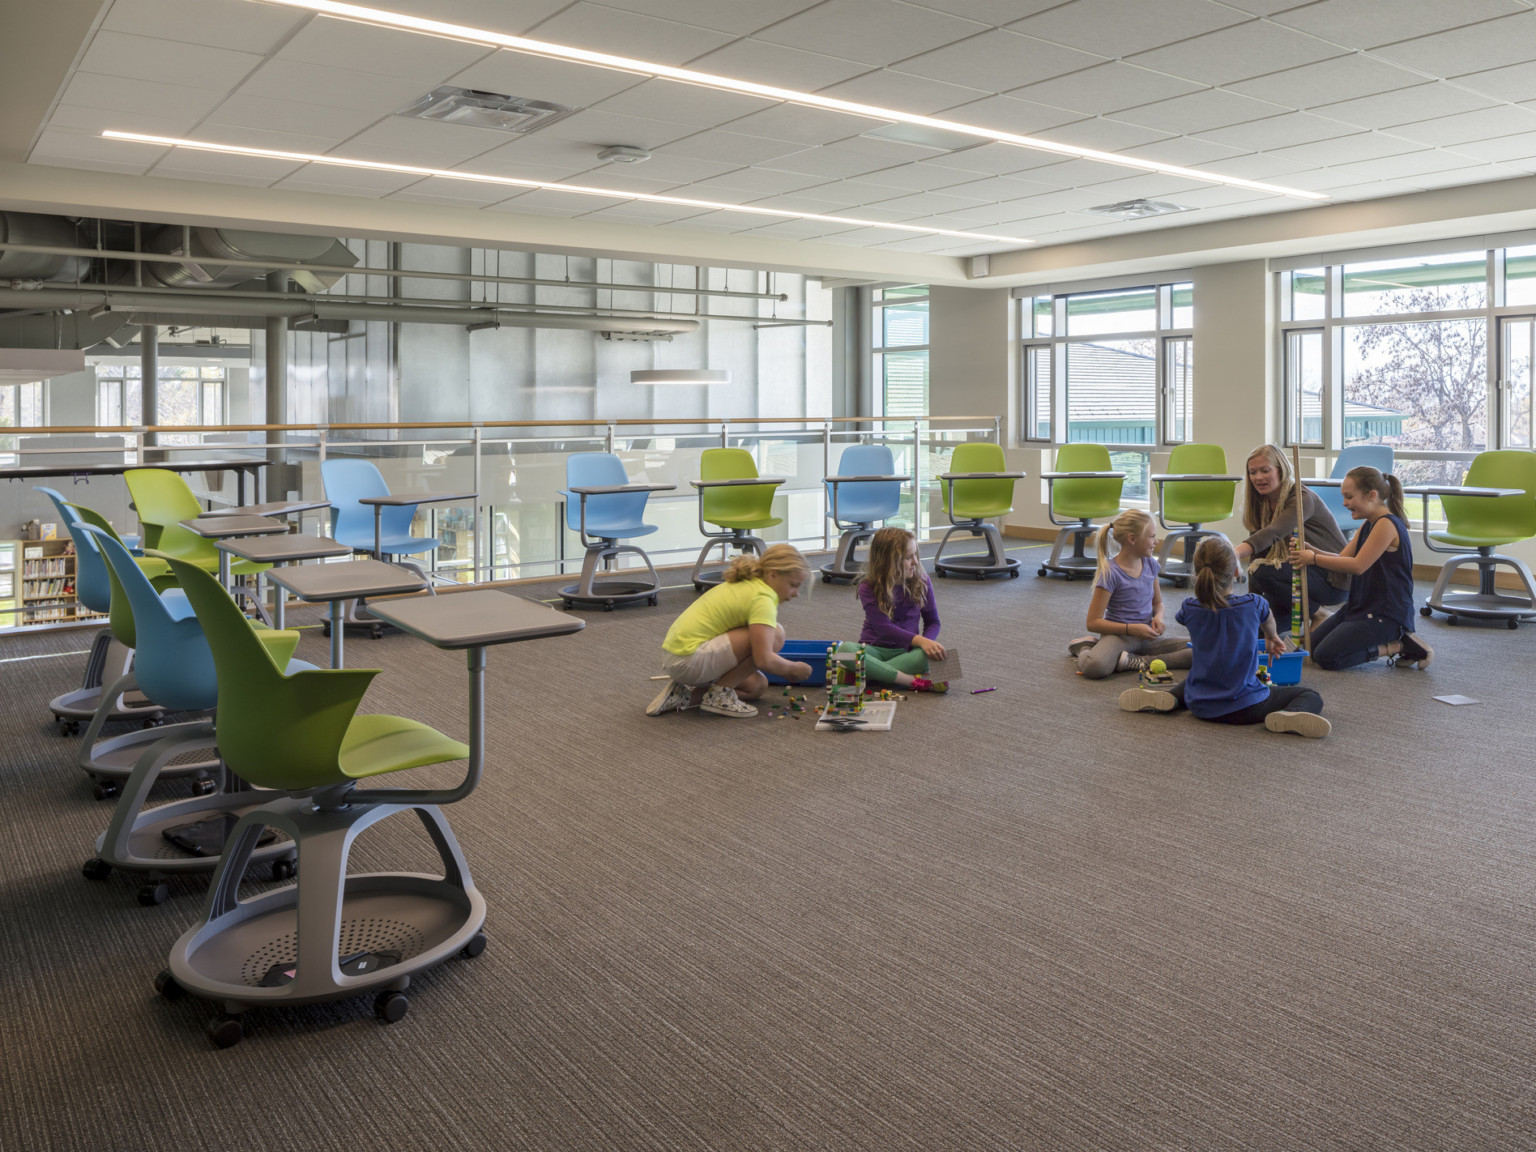 parallel lighting in acoustic tile ceiling over carpeted floor and green and blue movable kids seating with kids on floor